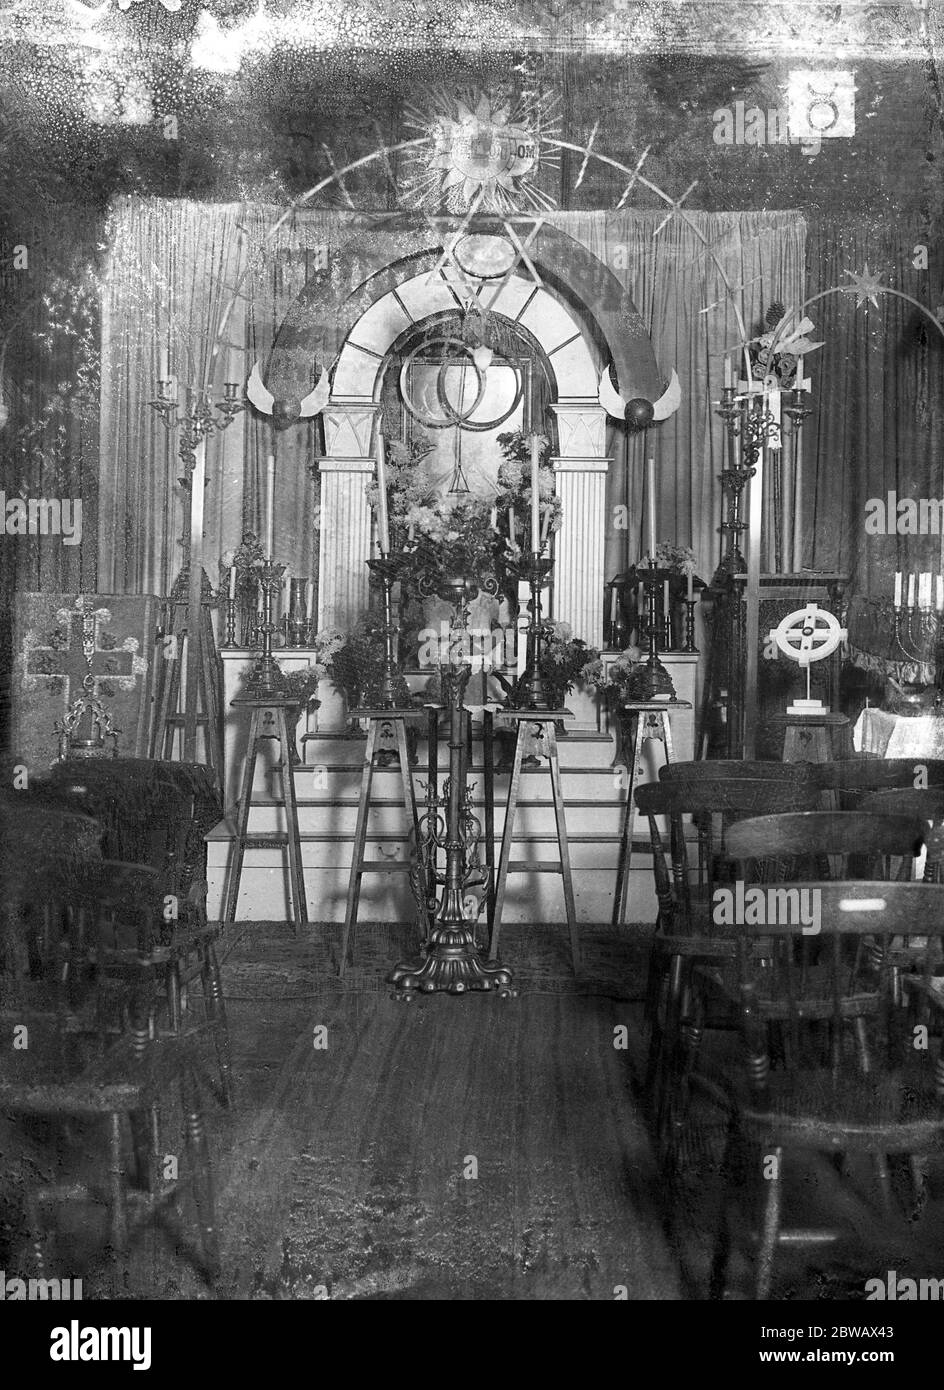 Church in a station . The interior of the church at Denmark Hill station , headquarters of the Universal Brotherhood Church of the Comforter . 1 January 1927 Stock Photo